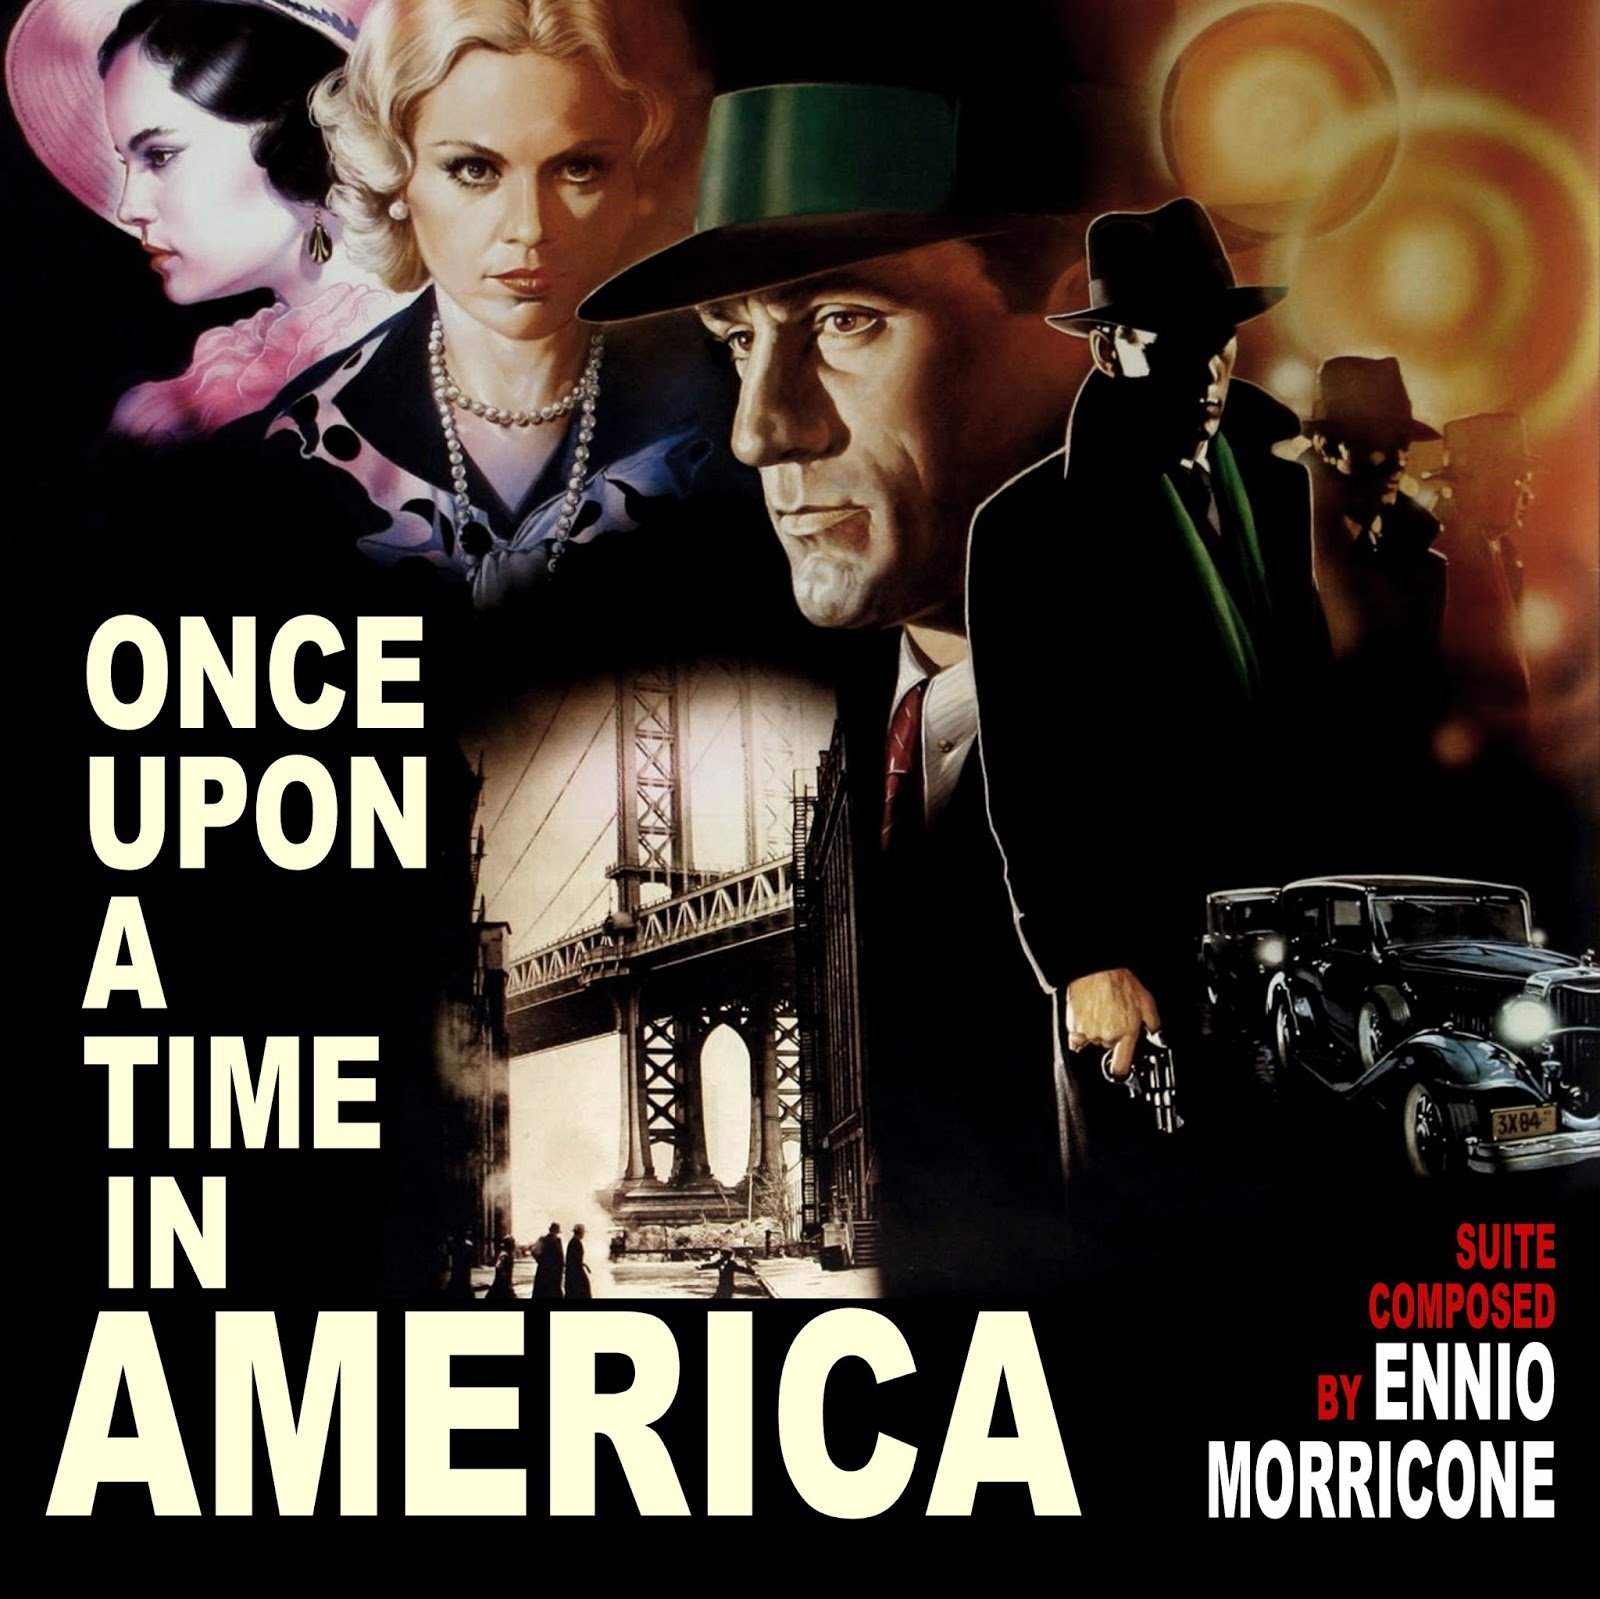 Once время. Morricone, Ennio once upon a time in America. Эннио Морриконе однажды в Америке. Once upon a time in America Эннио Морриконе. Ennio Morricone - once upon a time in America 1984.